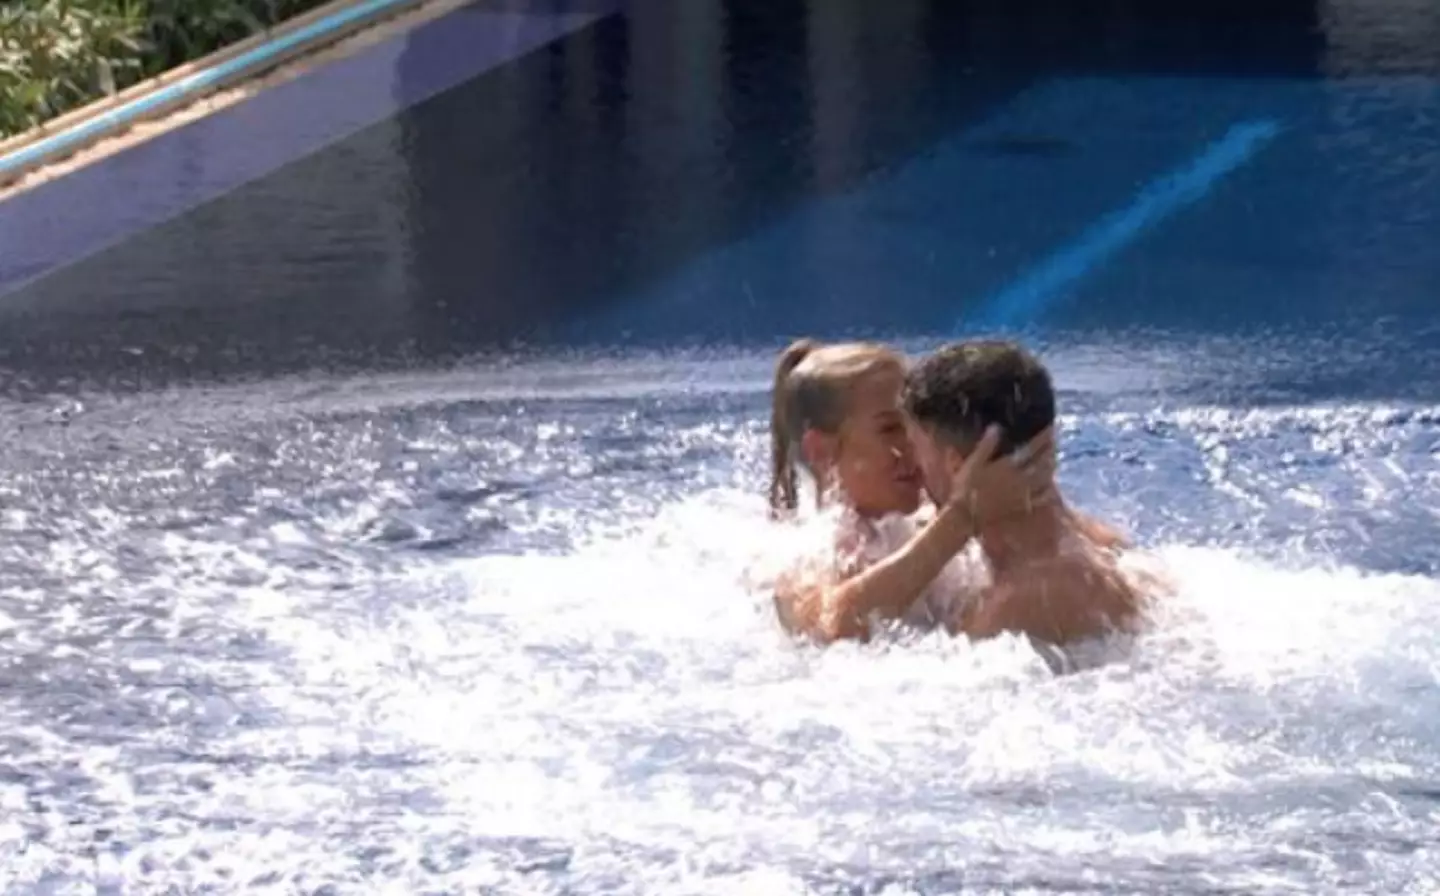 The main villa were also tasked to kiss in the pool (